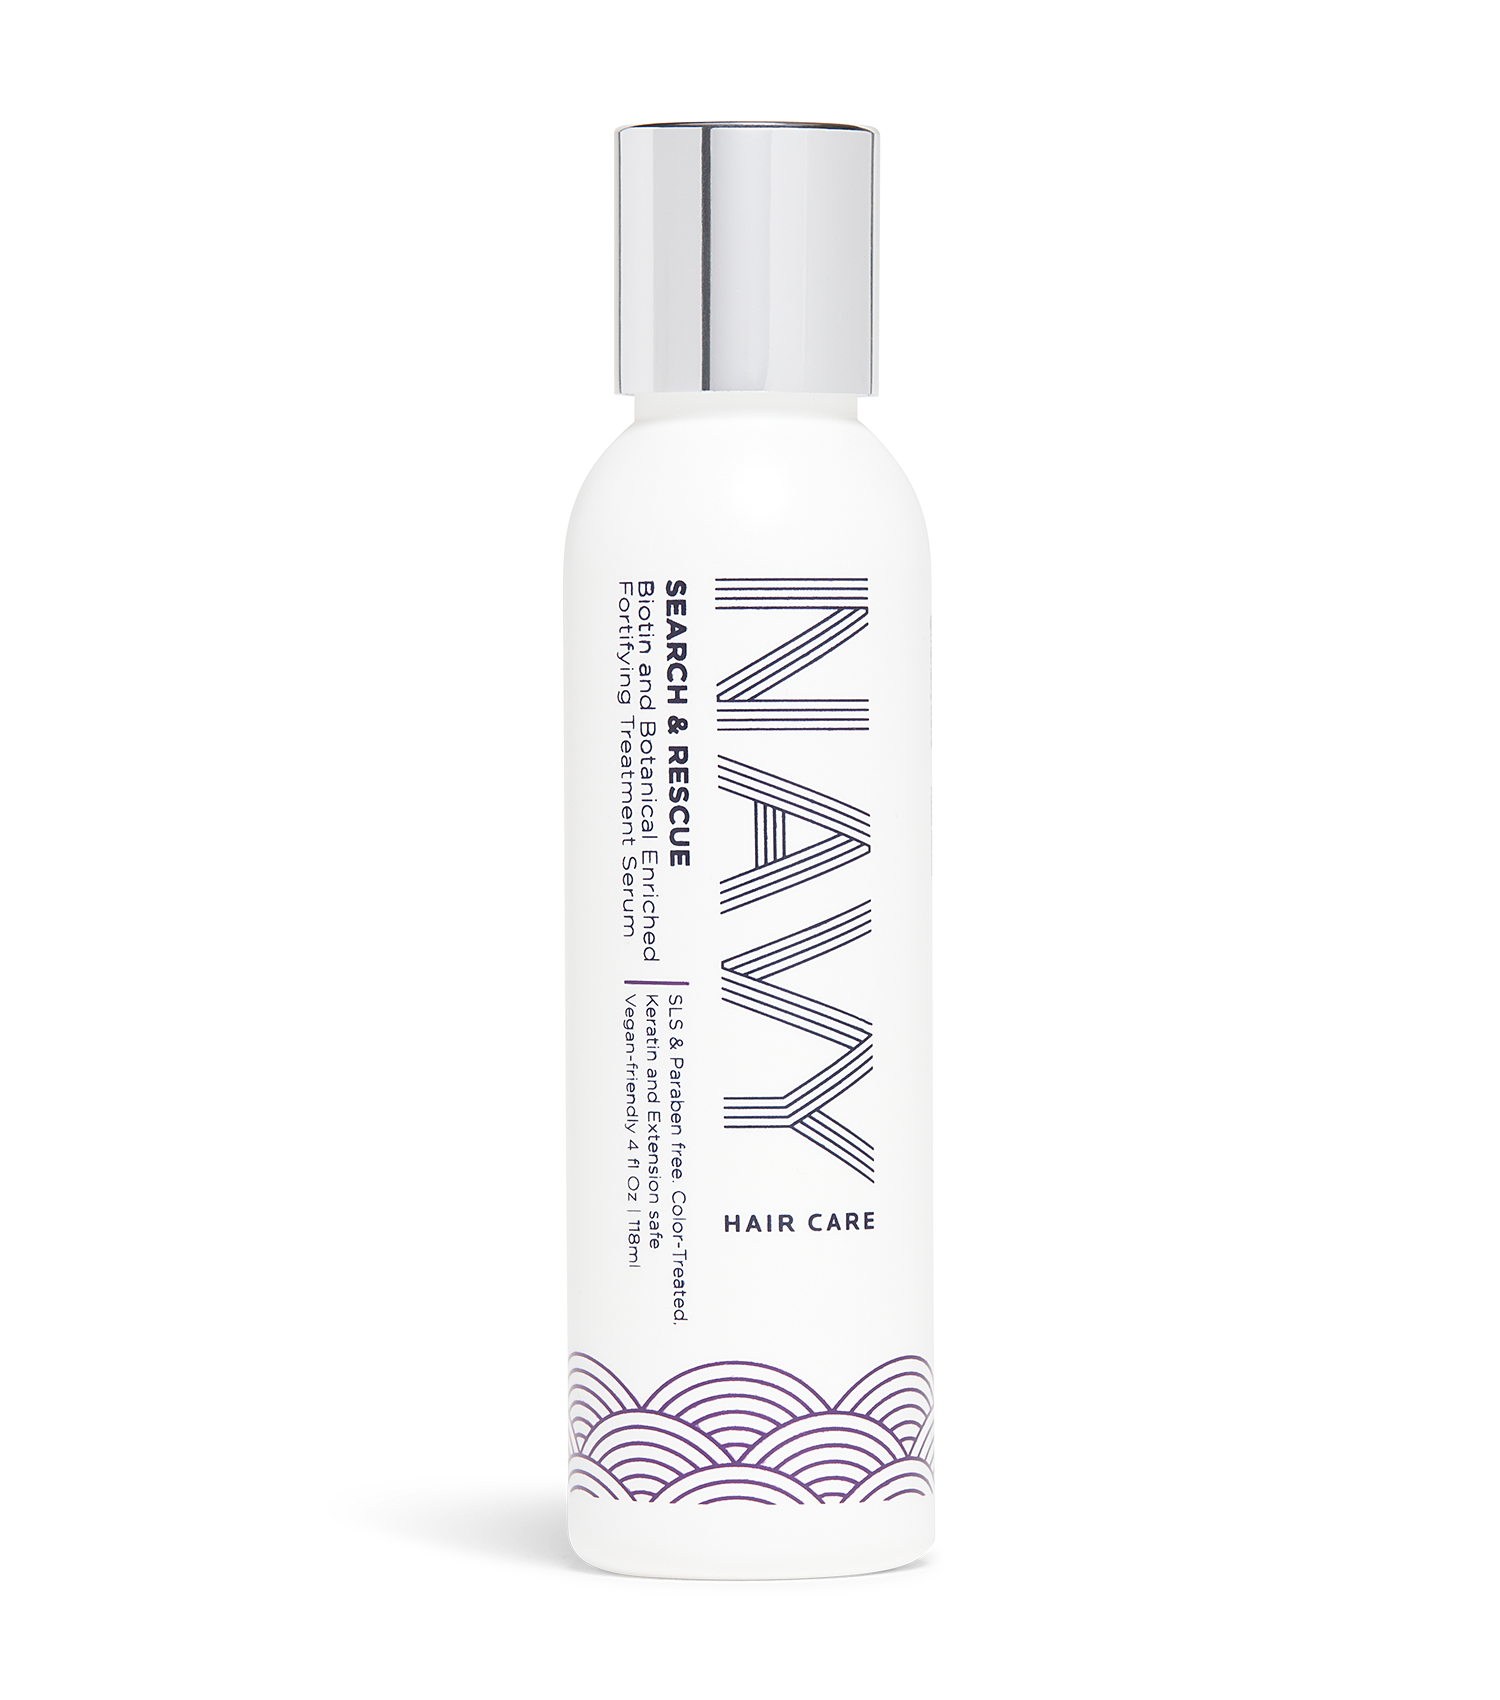 Navy Haircare Search & Rescue - Biotin and Botanical Enriched Fortifying Treatment Serum